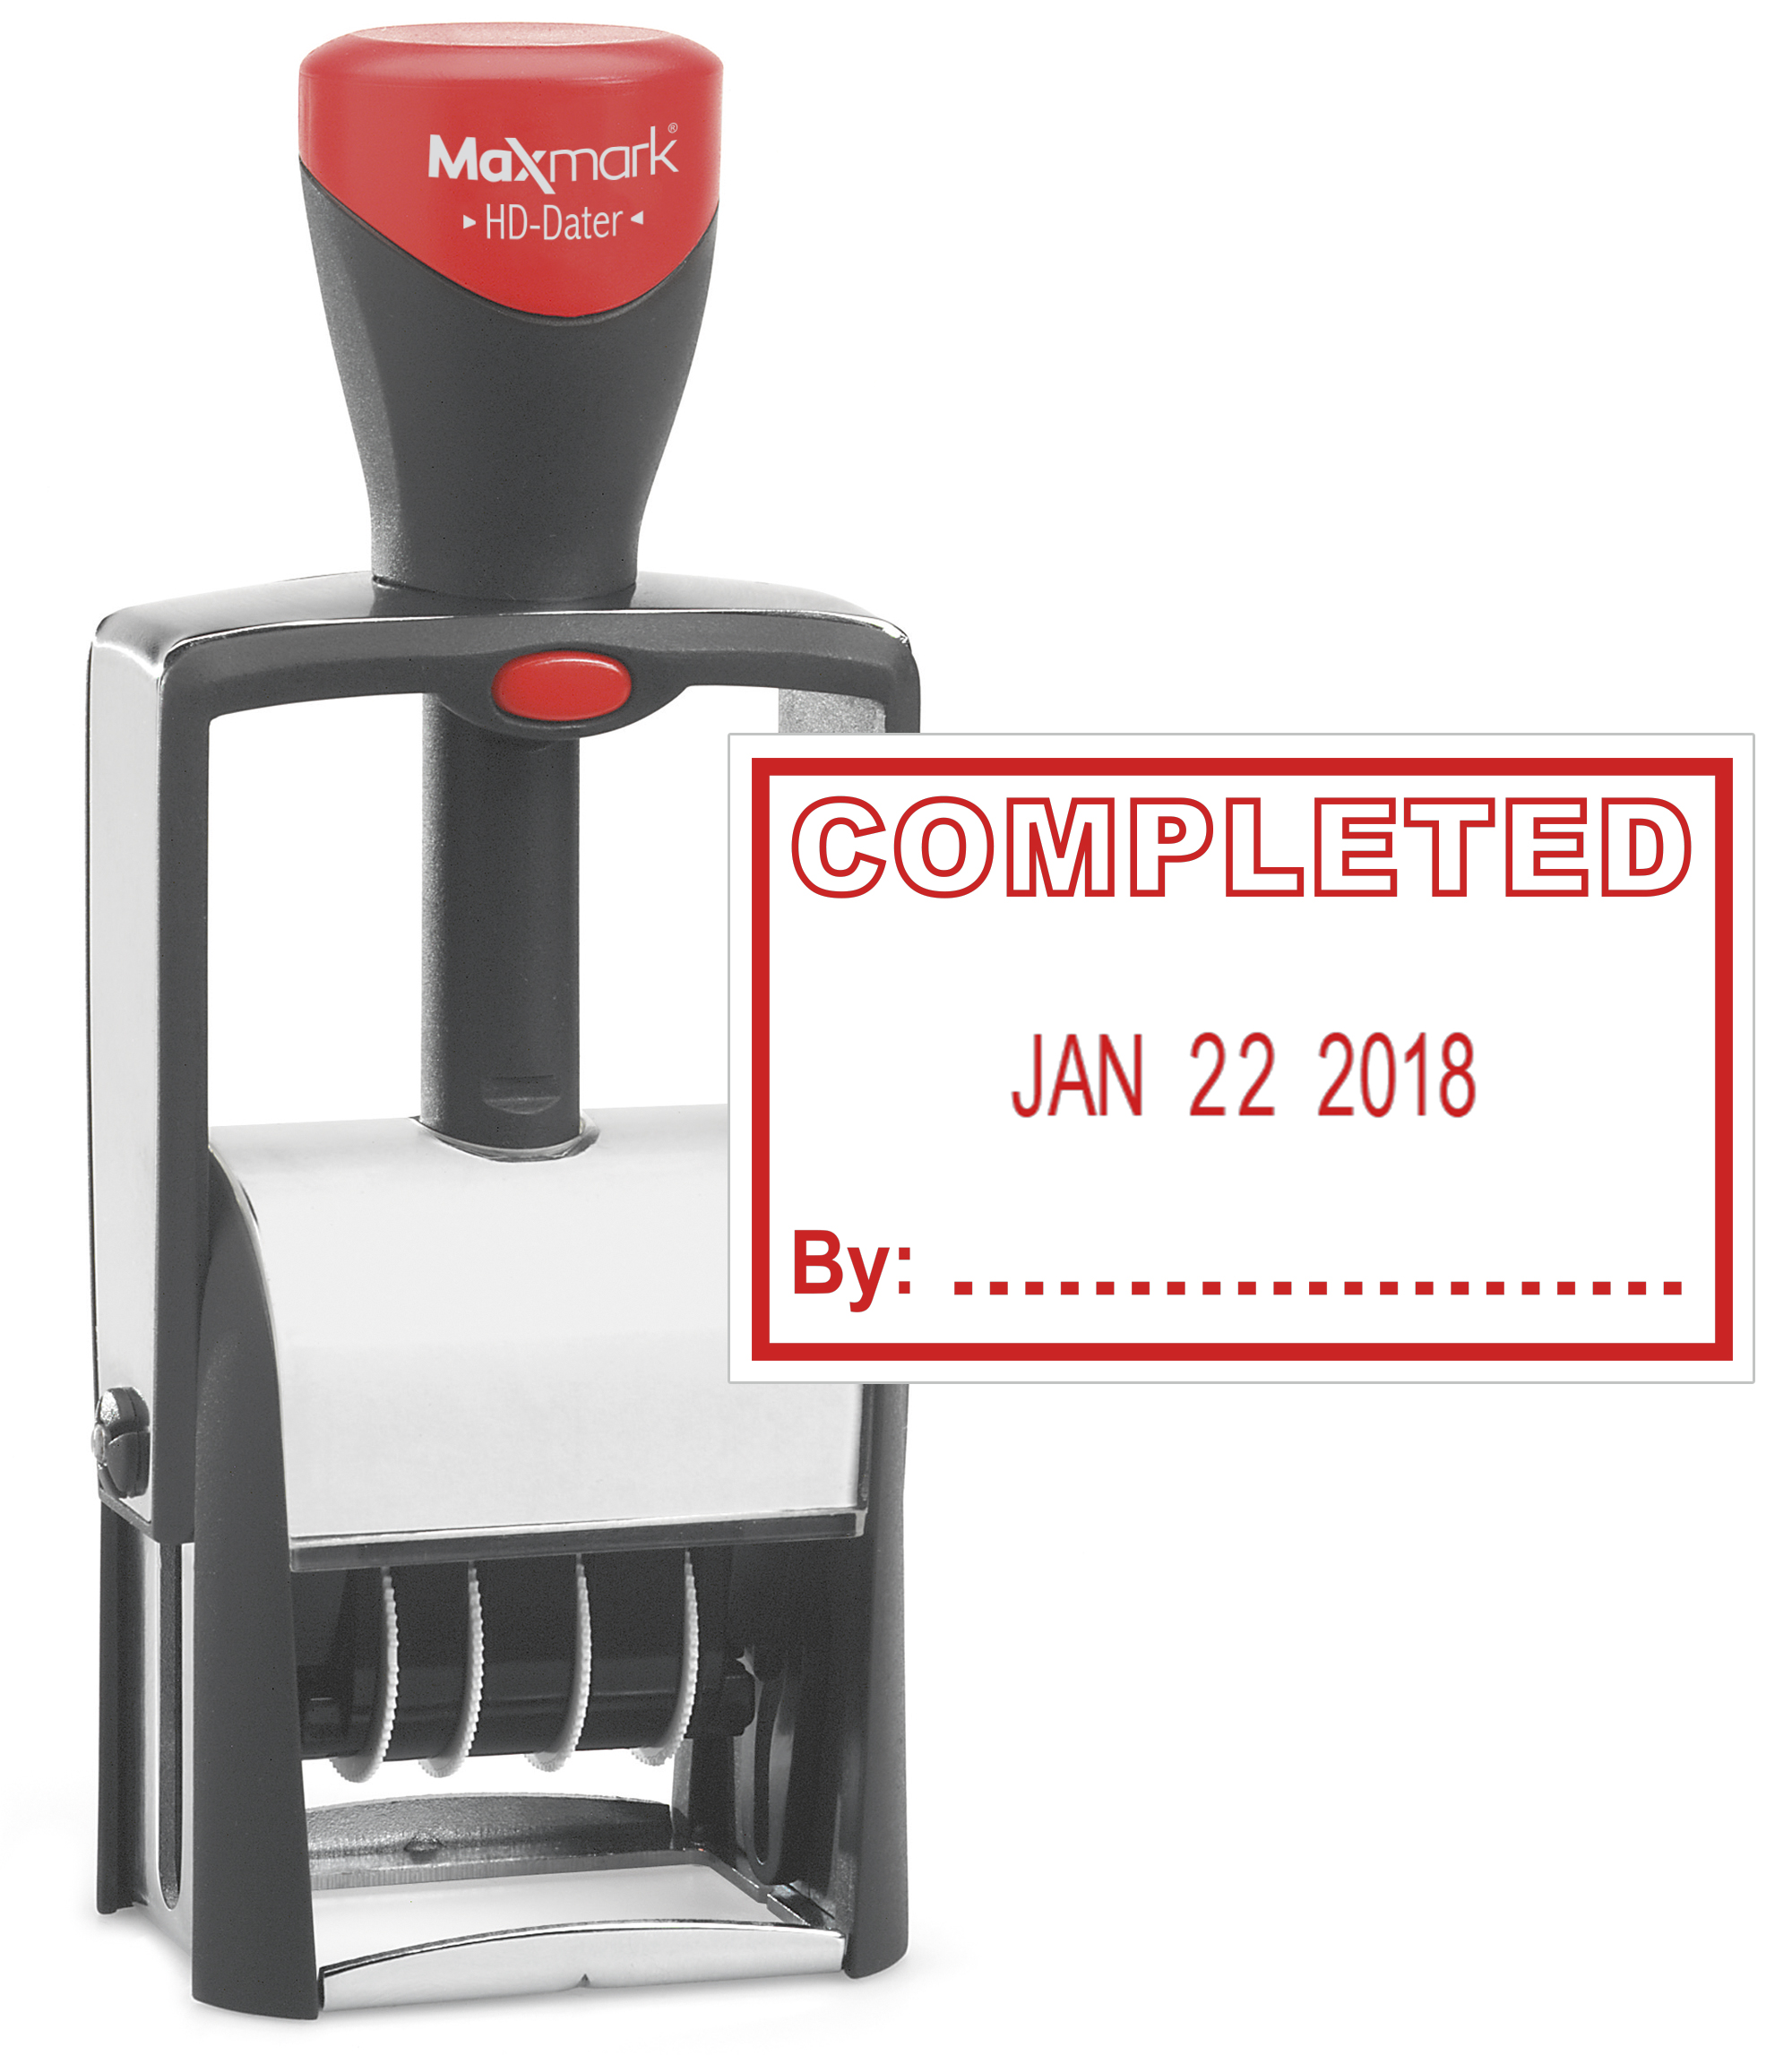 Heavy Duty Date Stamp with "COMPLETED" Self Inking Stamp - RED Ink